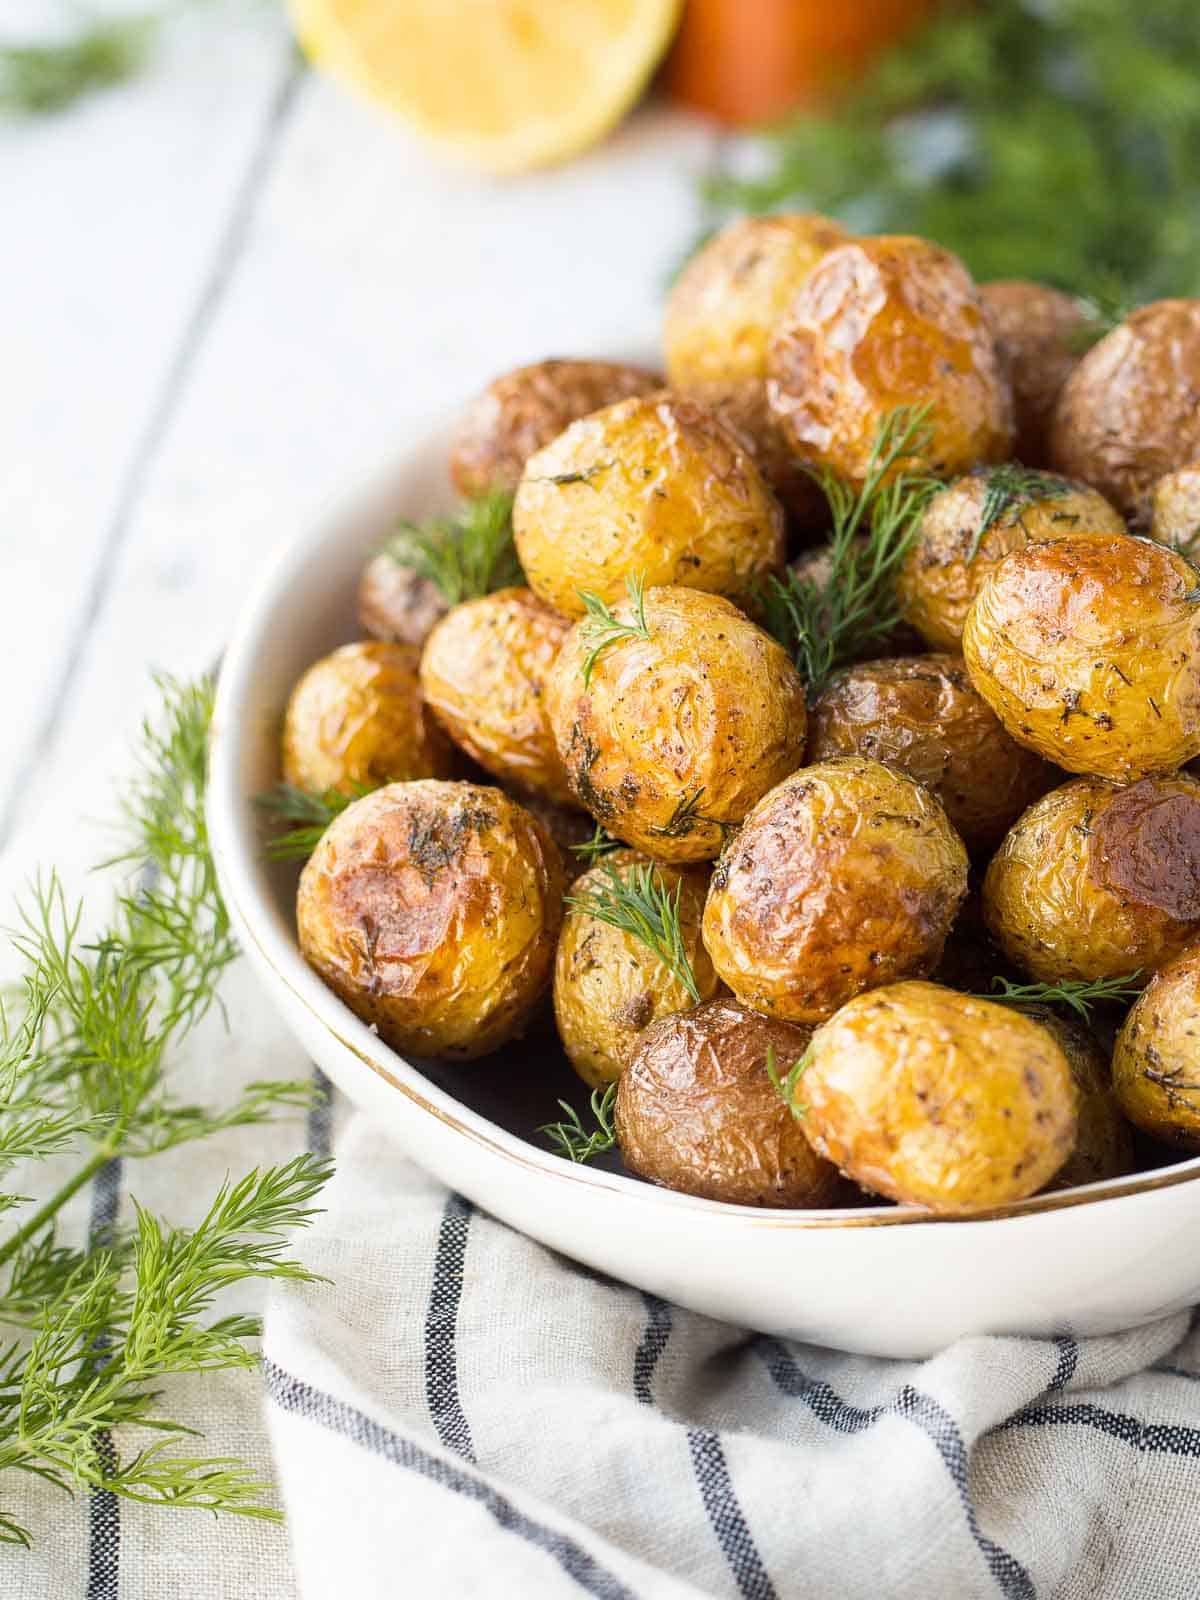 Partial front view of roasted potatoes in round white bowl, garnished with fresh dill.